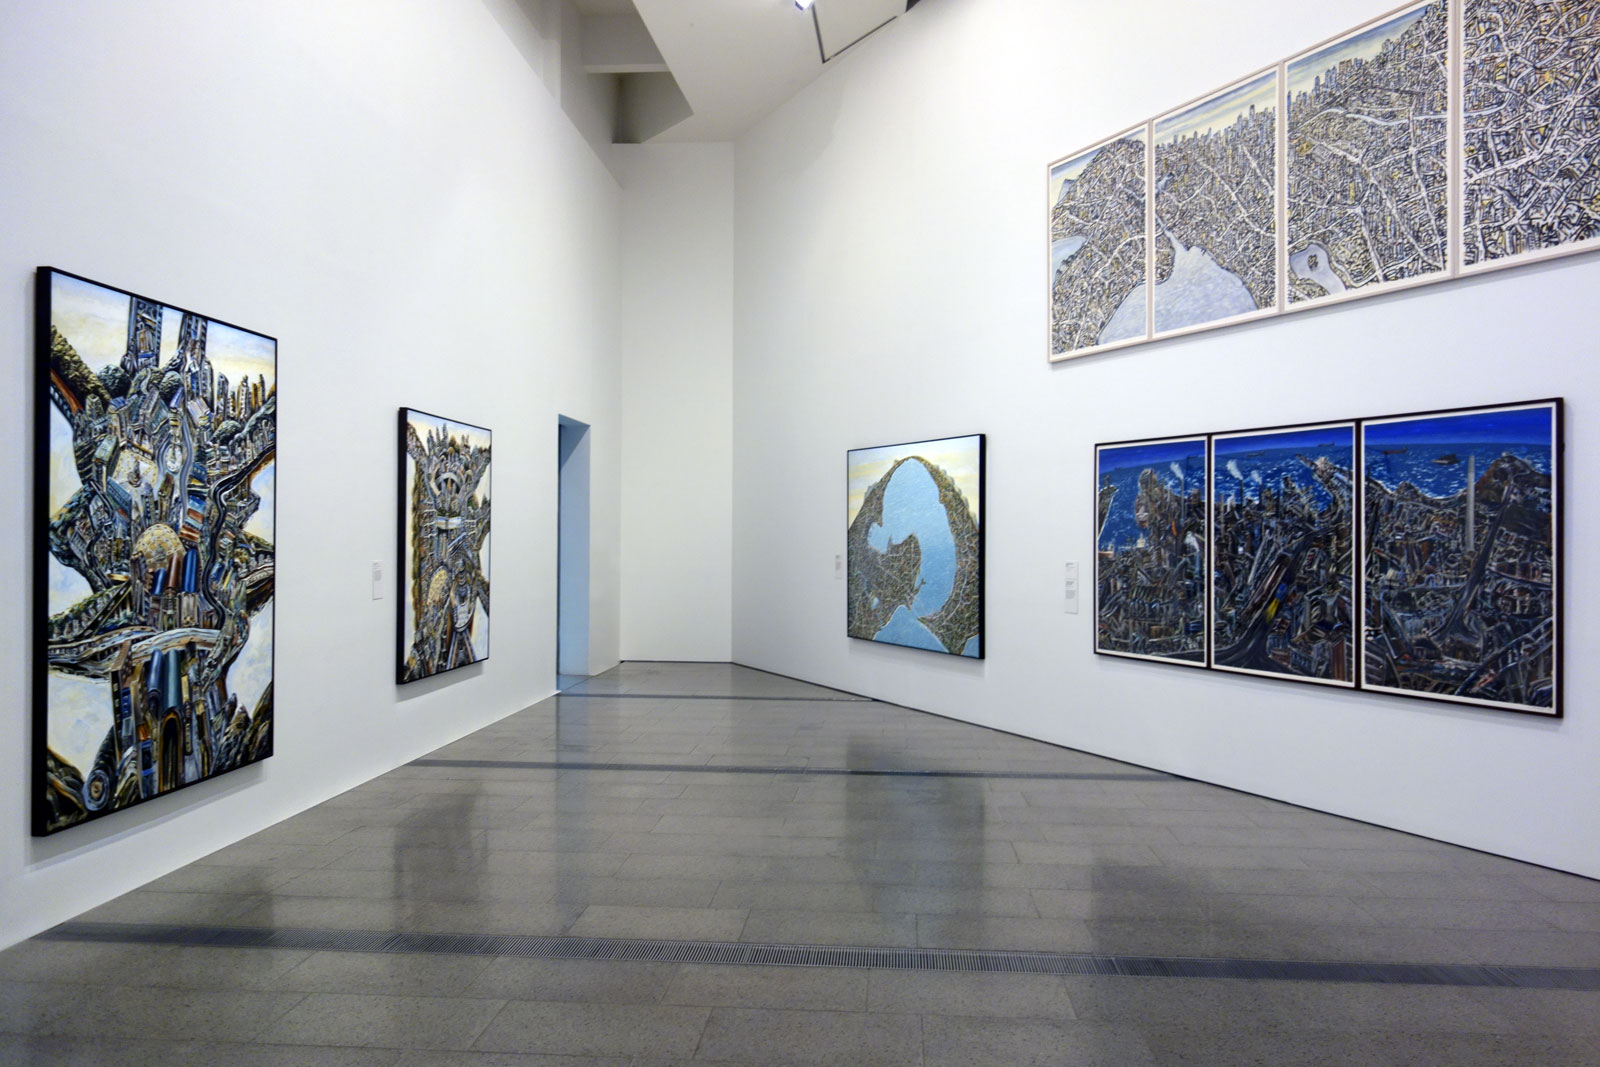 Installation view of the opening room of the exhibition 'Jan Senbergs: Observation – Imagination' at The Ian Potter Centre: NGV Australia showing at left in both images, 'The elated city' followed by 'Paolozzi's city'